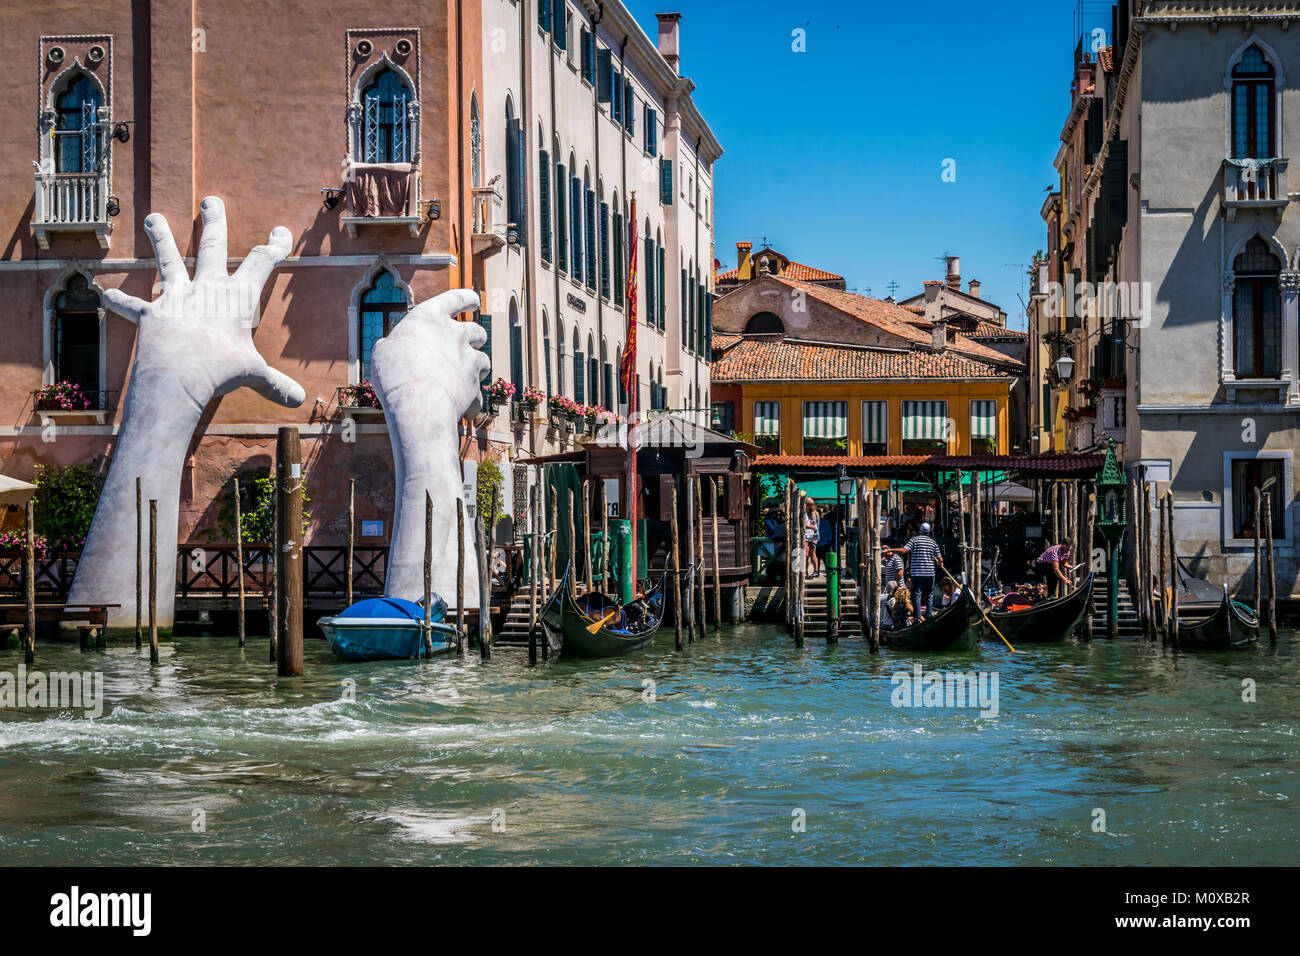 Artwork titled “Support” emerges from Grand Canal, by Lorenzo Quinn. The contemporary sculpture of giant hands, 2017 Venice Biennale. Stock Photo